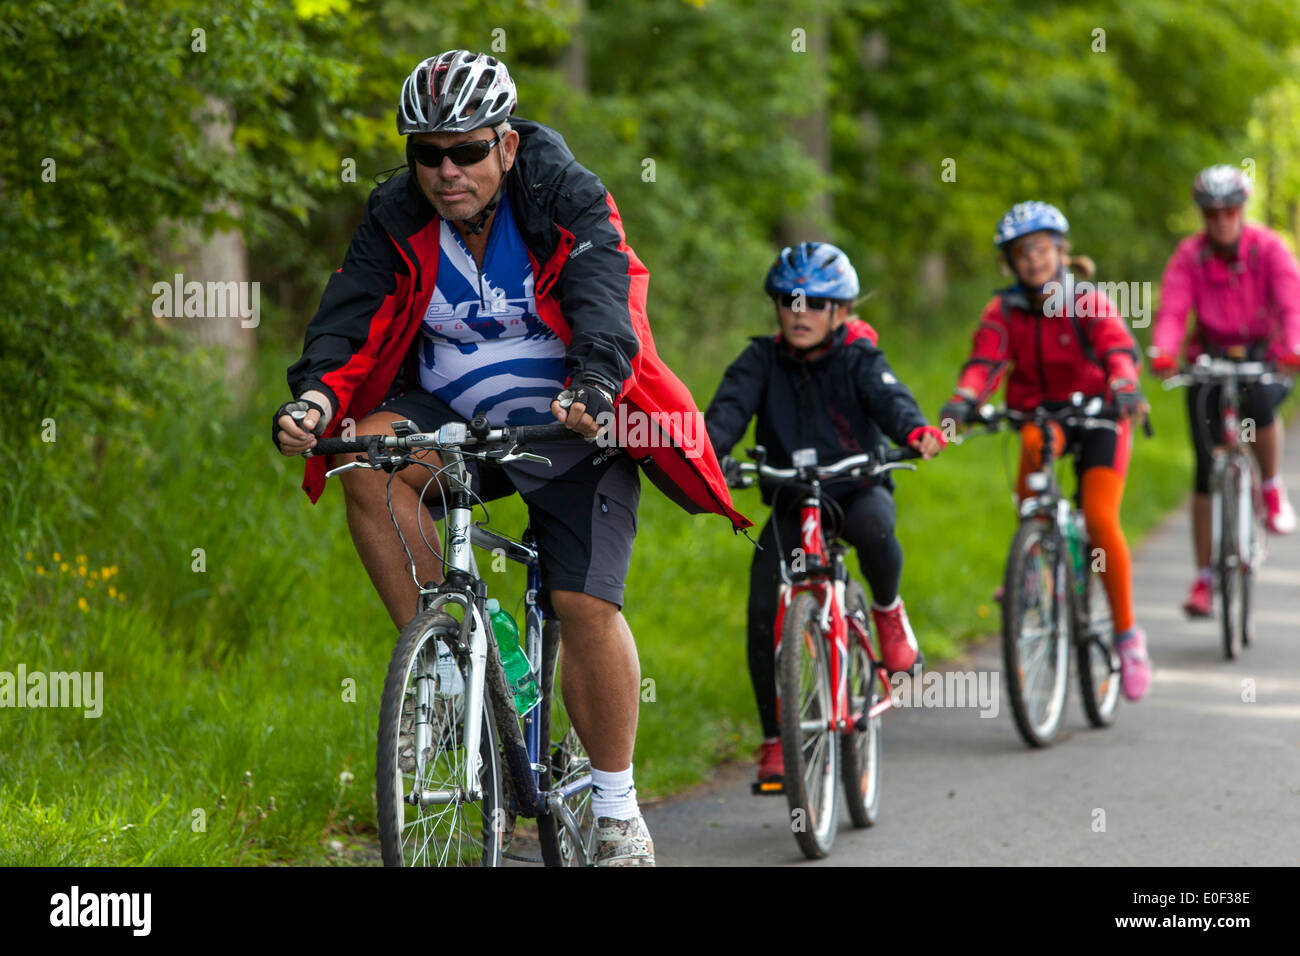 People on the bicycle path,  trail children ride a bike helmet Stock Photo